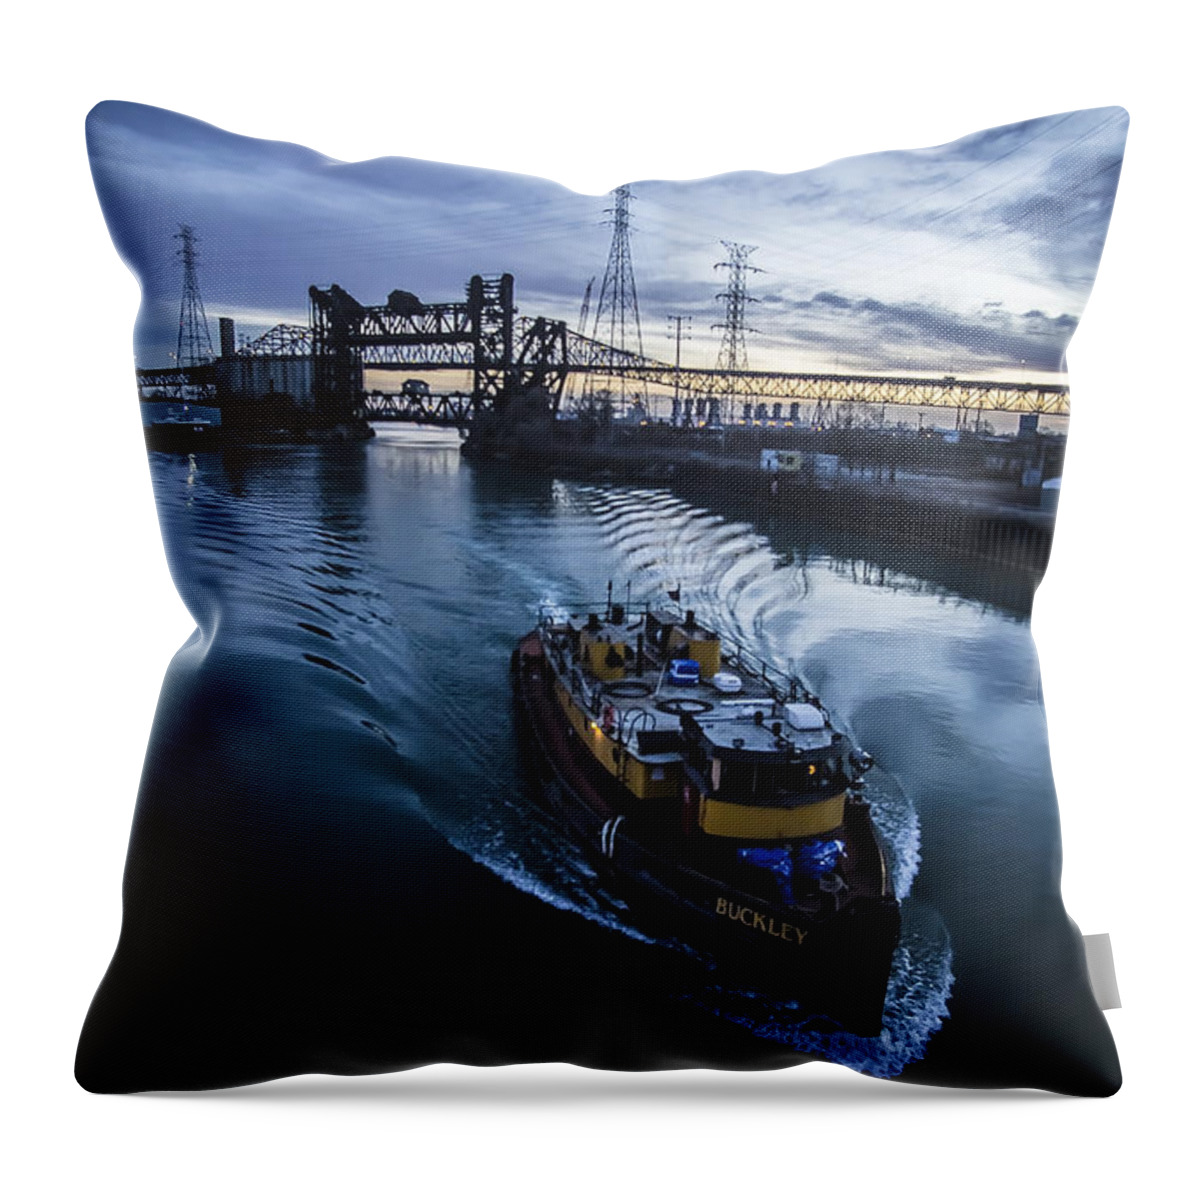 Tug Boat Throw Pillow featuring the photograph Yellow Tug Boat Approaching by Sven Brogren